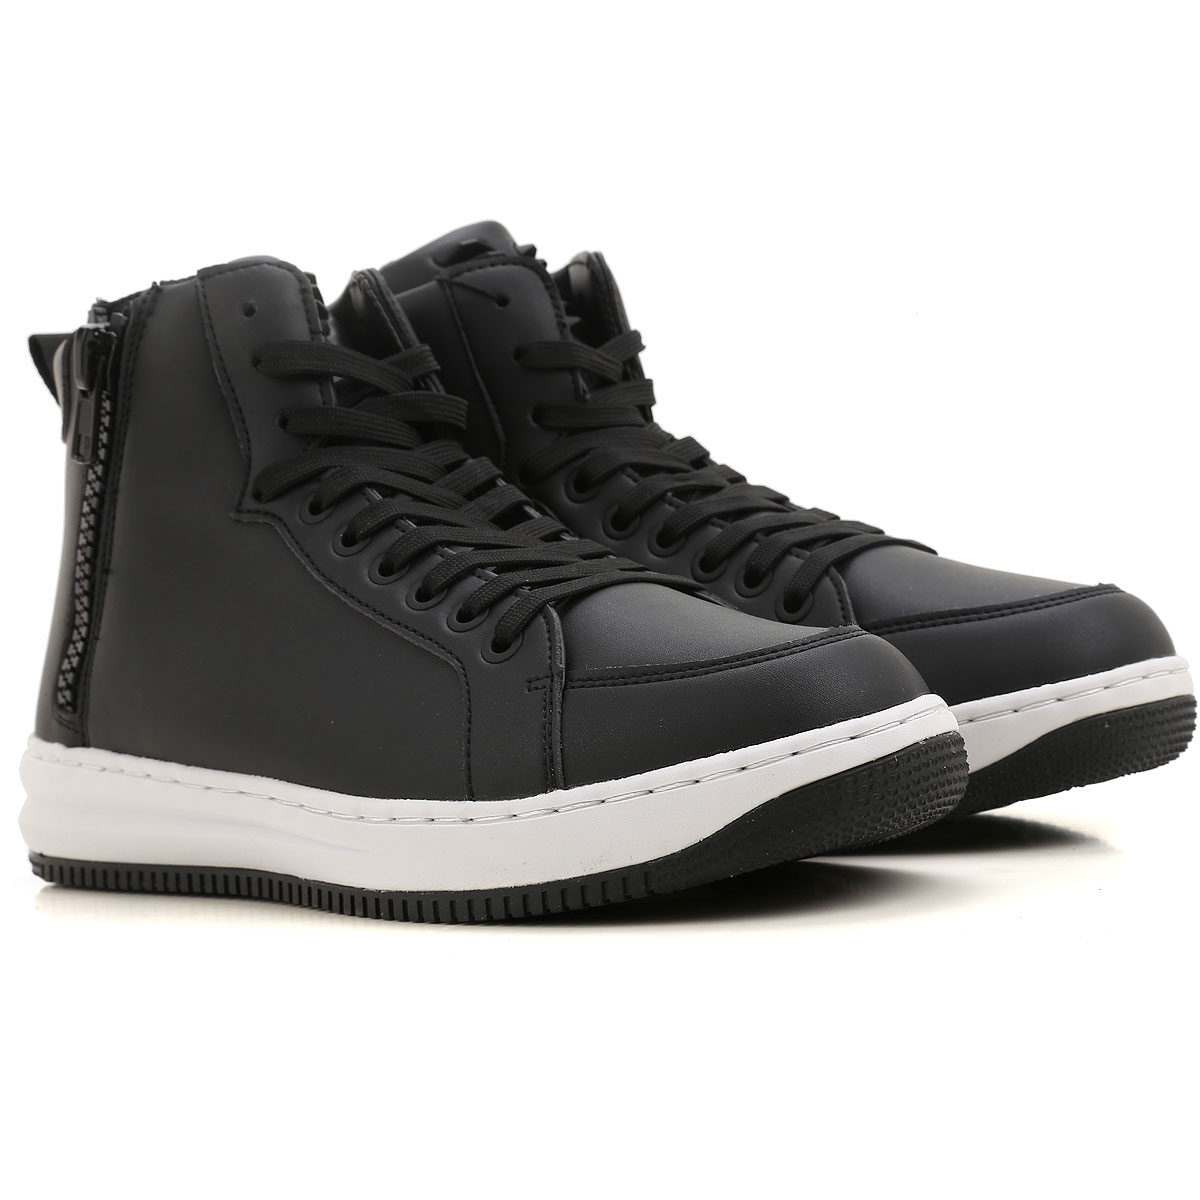 armani winter shoes - 57% OFF 